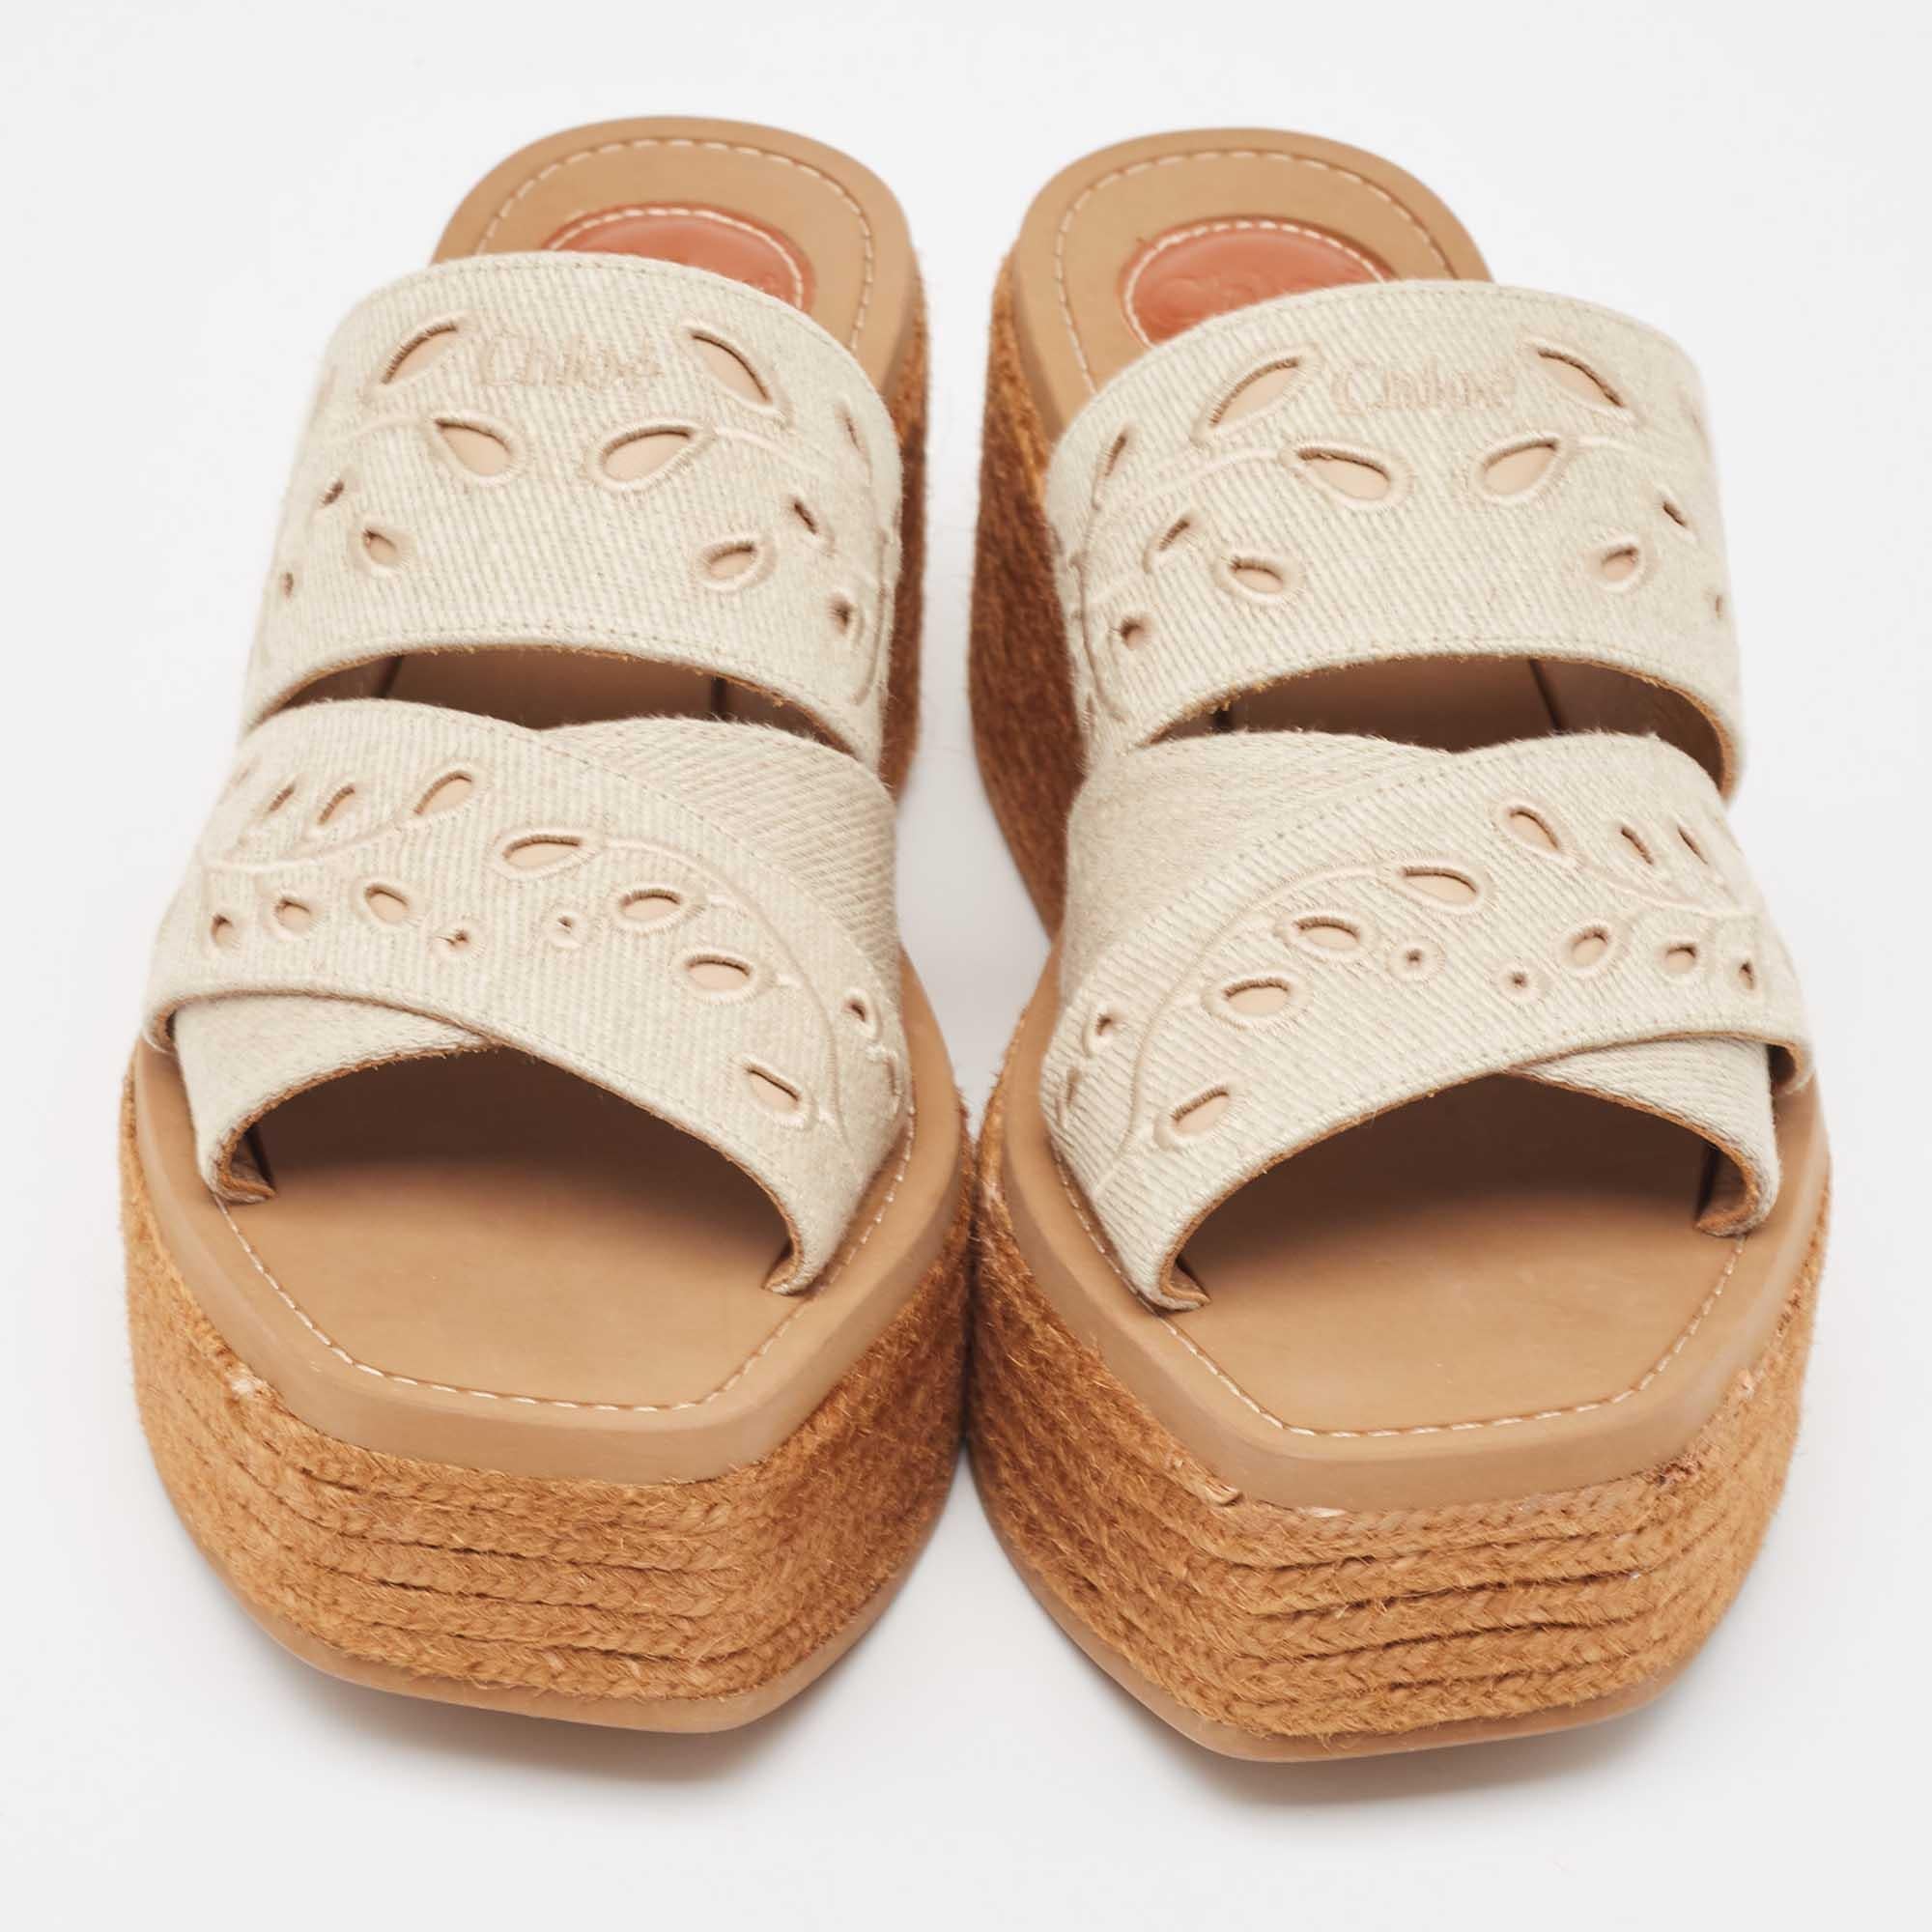 These Chloe sandals are chic and constructed with care for a great fit. Crafted from quality materials, they are durable, easy to style, and fabulous, with comfortable interiors, artful designing, and beautiful uppers.

Includes: Original Box

